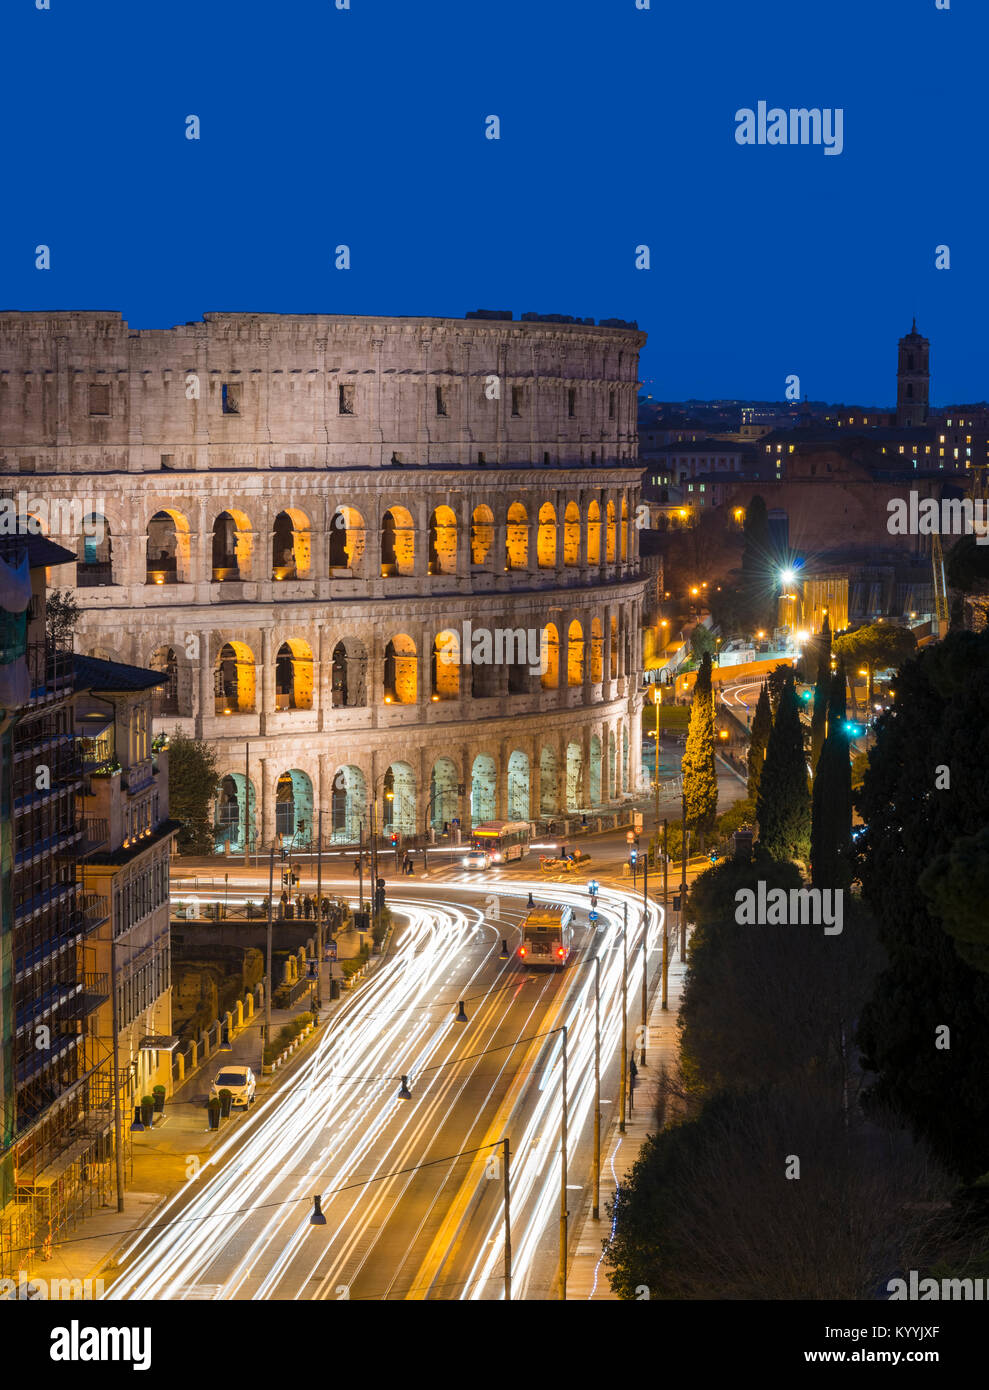 The Colosseum, Rome, Italy at night Stock Photo